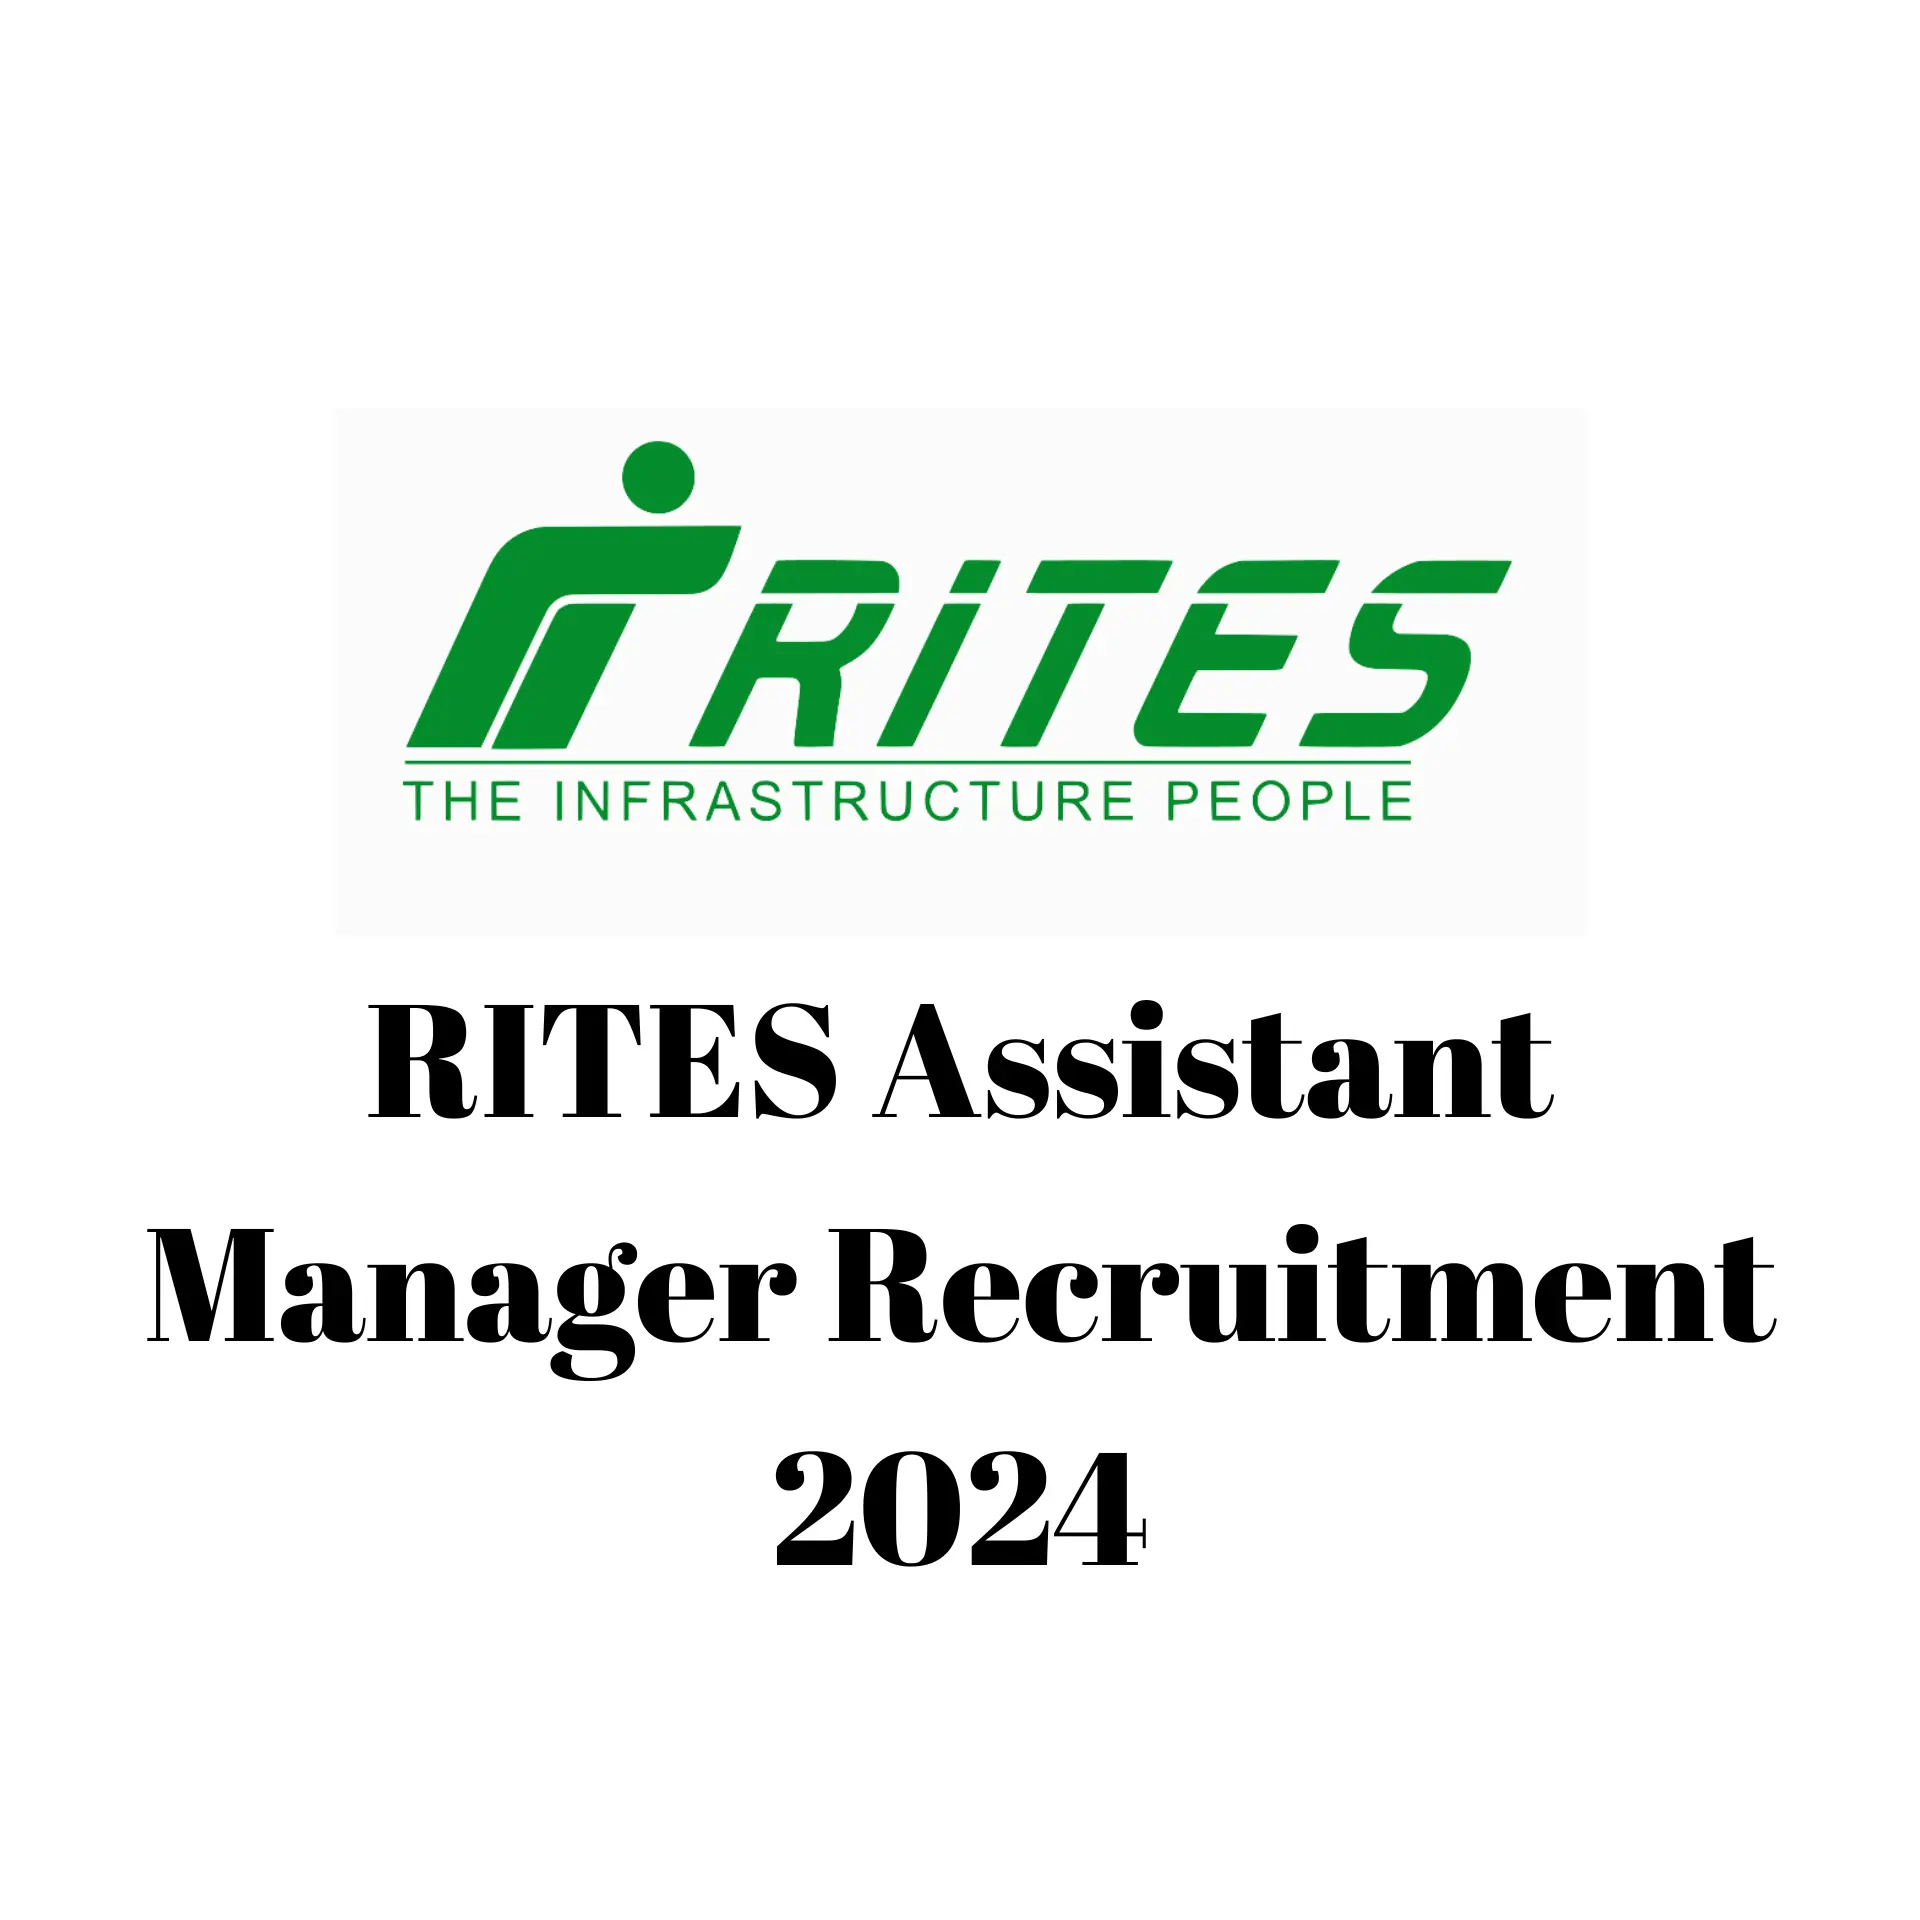 RITES Assistant Manager Recruitment 2024